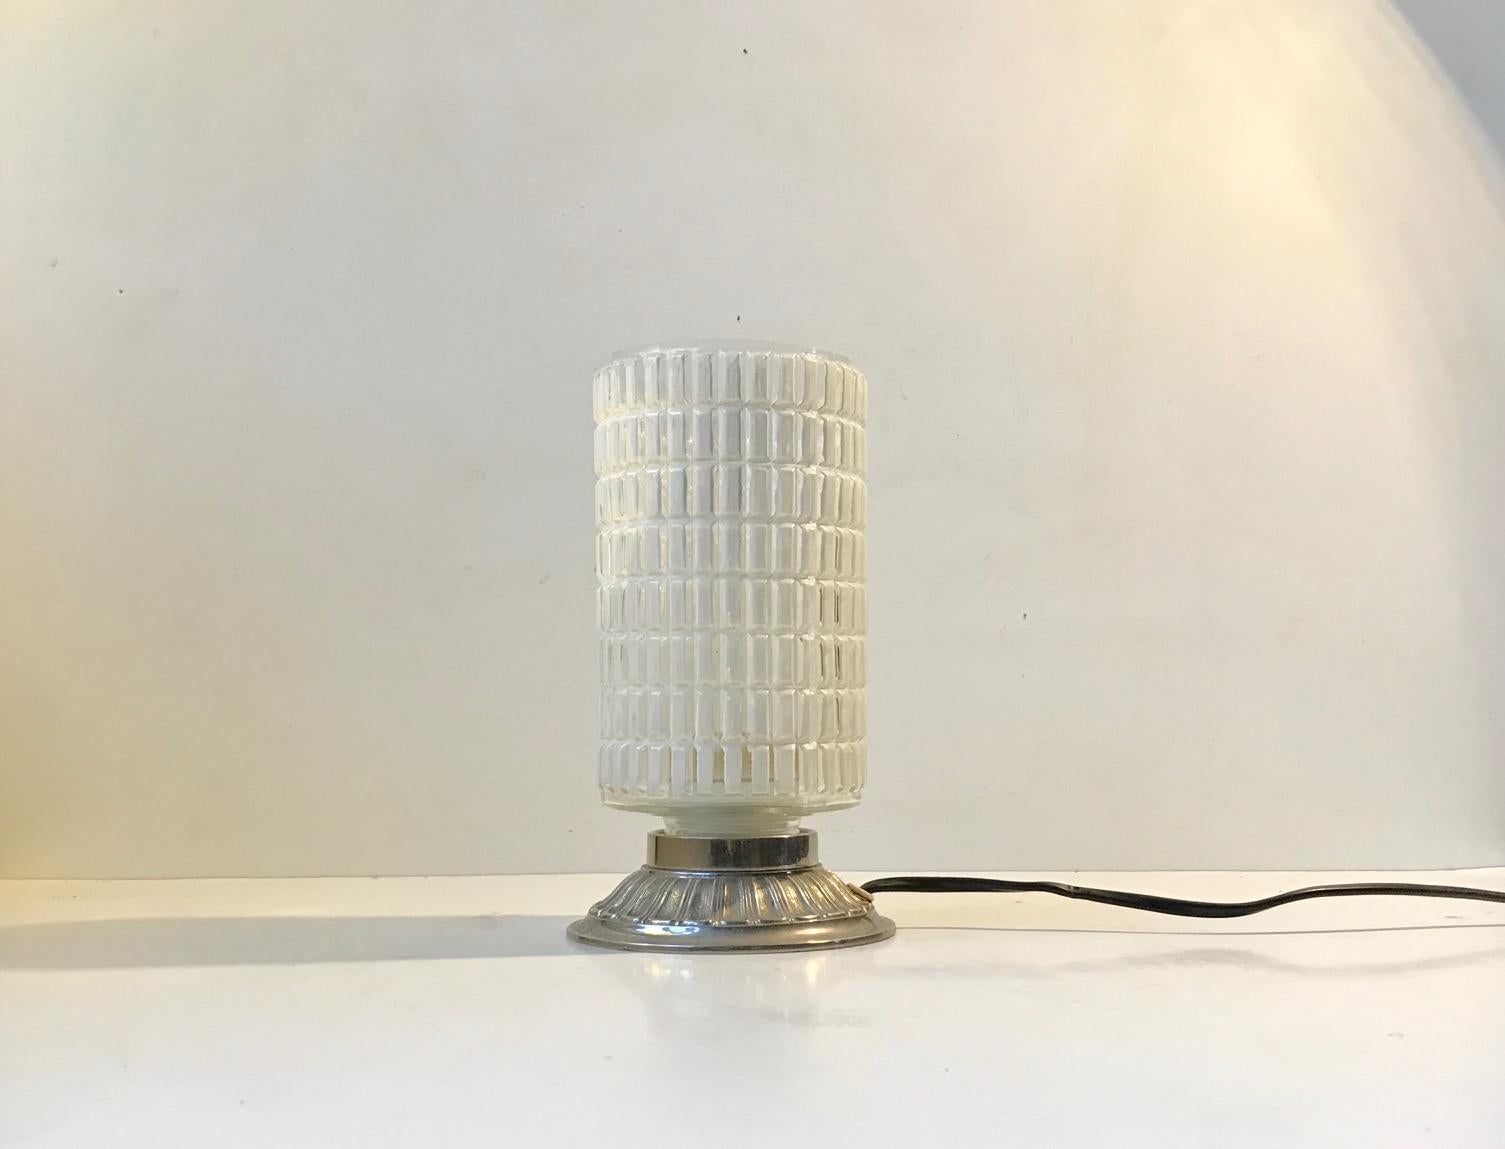 Small and unusual table light with a checkered glass shade and an aluminium base. These type of lights originally went under names as restaurant lamps or 'Dating lamps' and was intended to replace the candlesticks under dim lighting. It was made in